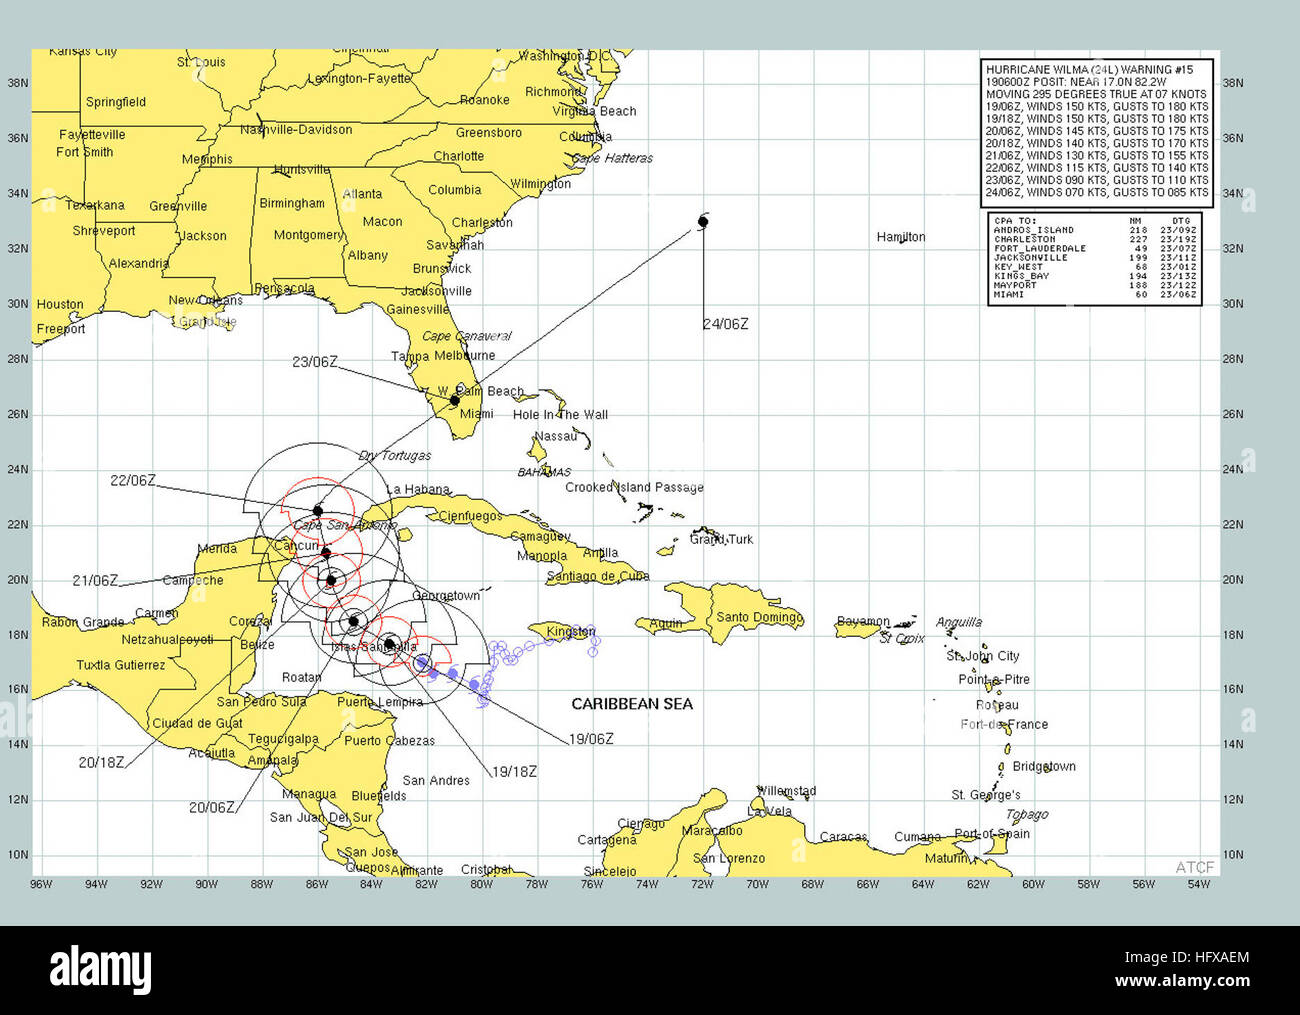 051019-N-1234W-002 Carribean Sea (Oct. 19, 2005) - Graphic produced by the U.S. Navy, Atlantic Meteorology & Oceanography Center, Norfolk, Va., showing the anticipated track of Hurricane Wilma. An Air force reconnaissance plane reported a barometric pressure reading of 884 mb. This is the lowest minimum pressure ever measured in a hurricane in the Atlantic Basin. A hurricane watch remains in effect in Cuba. All interests in the Florida Keys and the Florida Peninsula should closely monitor the progress of extremely dangerous Hurricane Wilma. At 5 AM EDT 0900z the center of Wilma was located nea Stock Photo